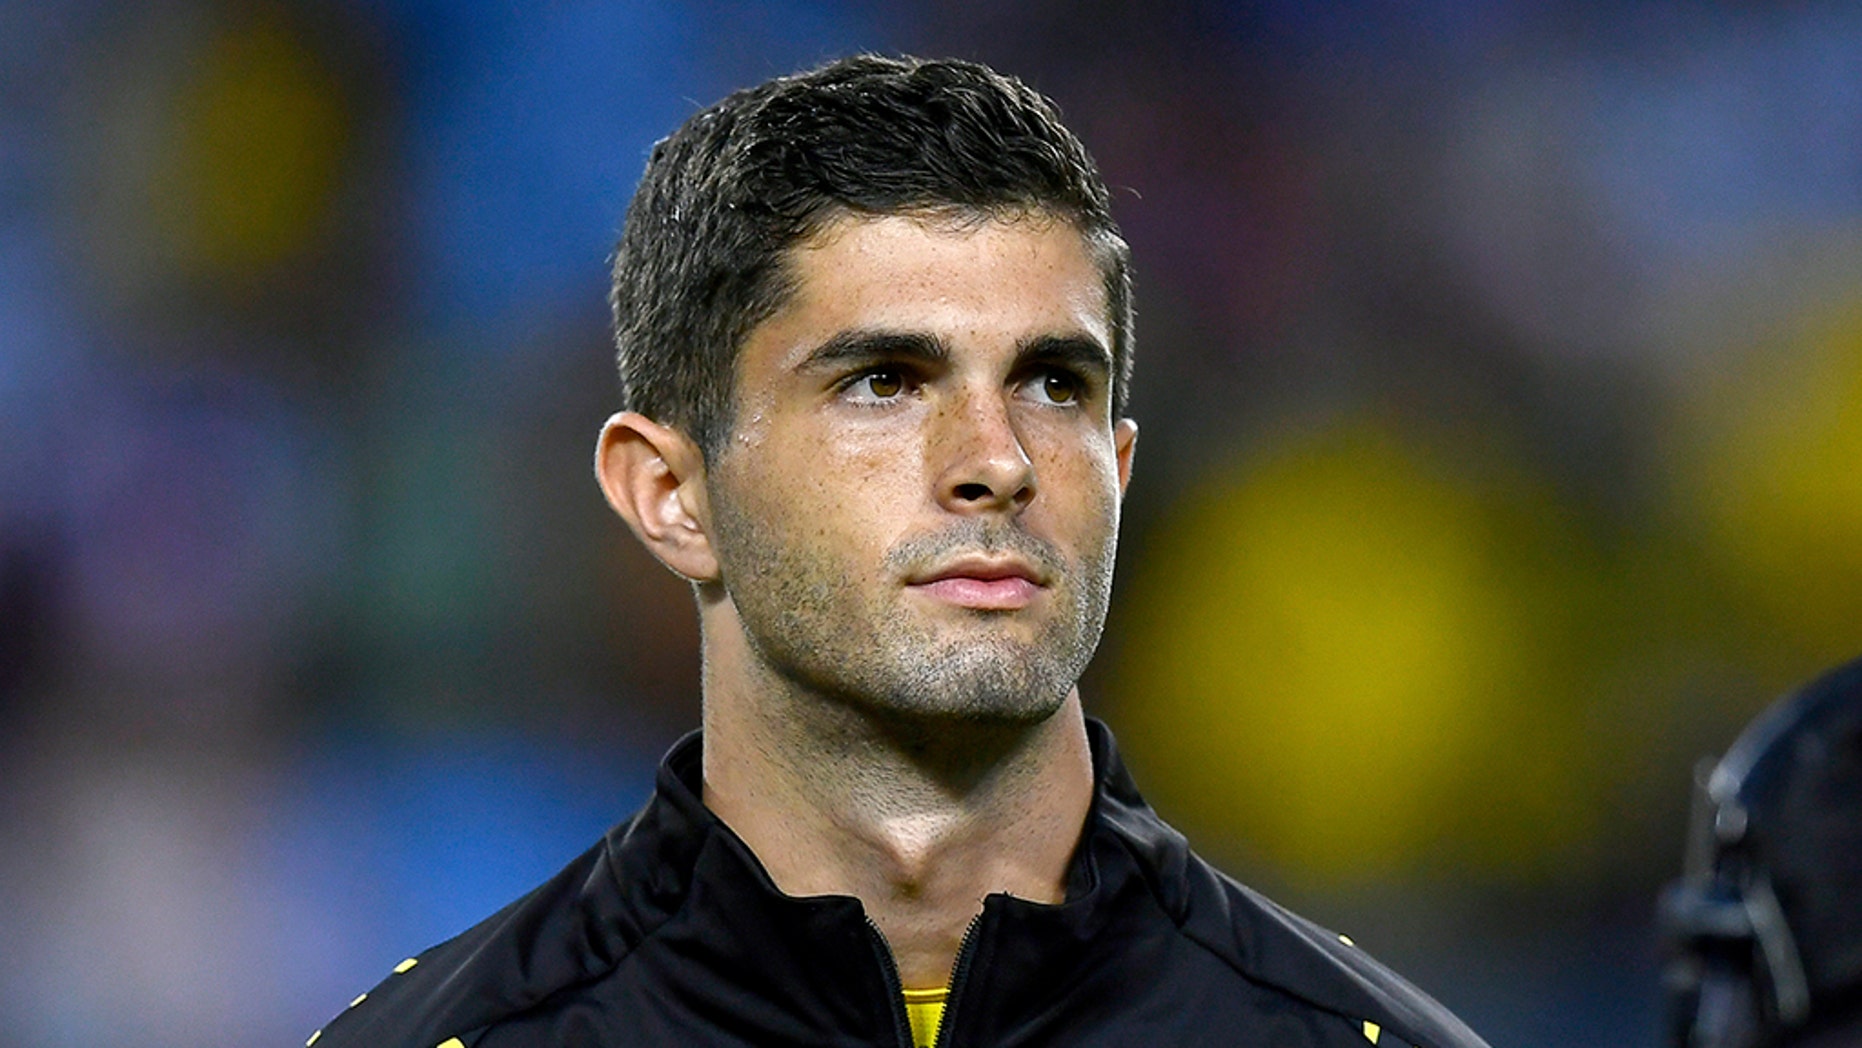 Christian Pulisic misses out on 'Man of the Match' award because of age